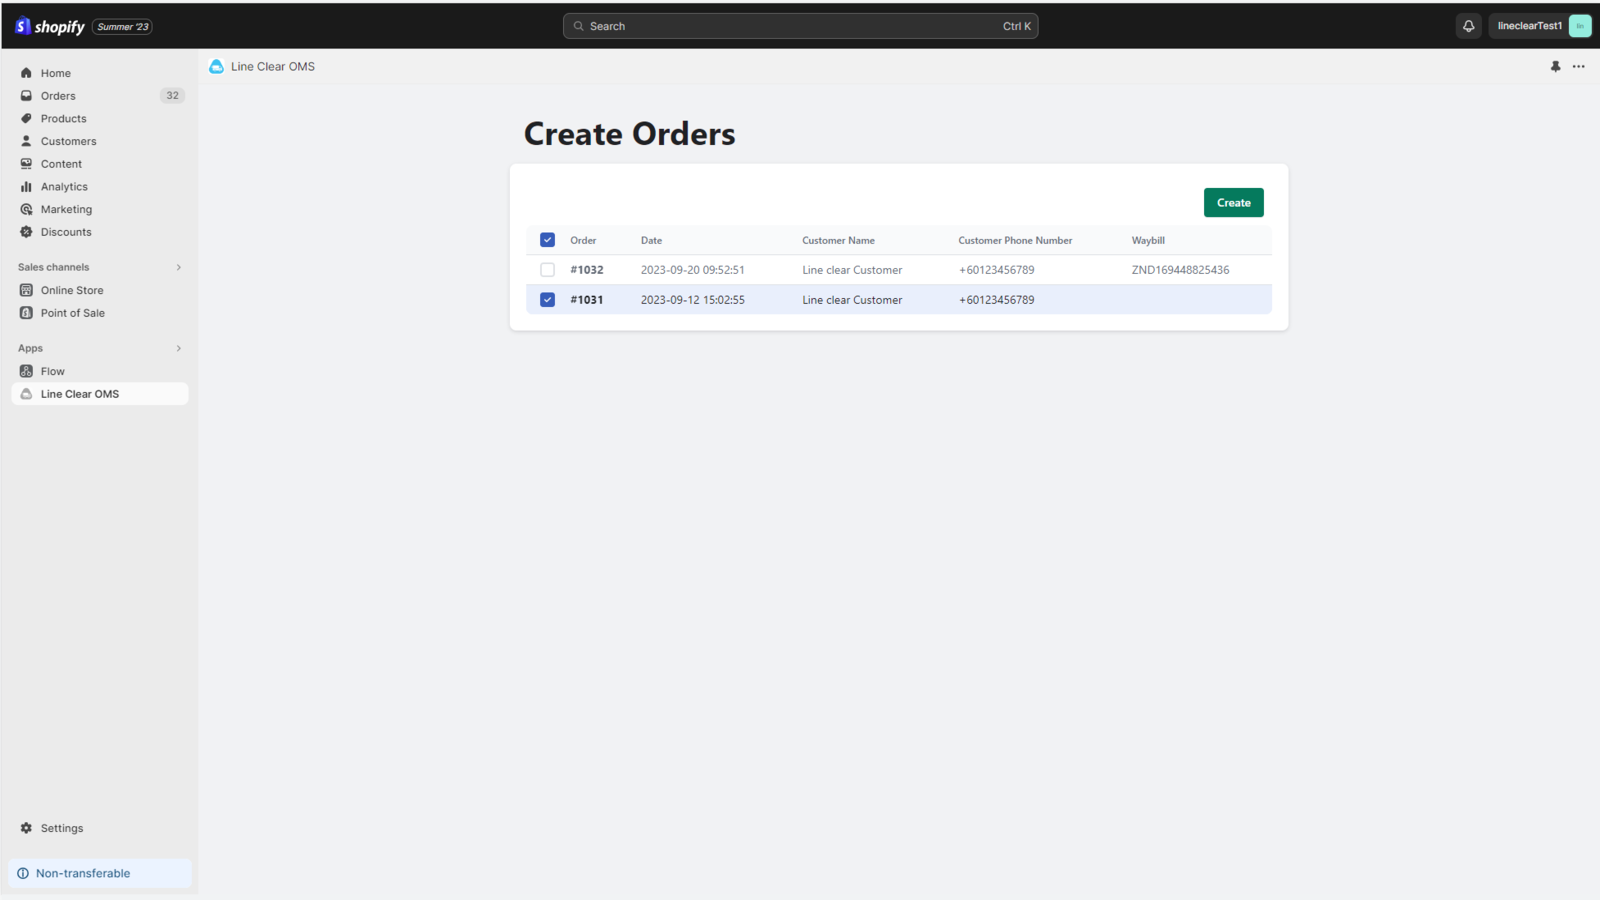 Interface for check if order eligible for create shipment